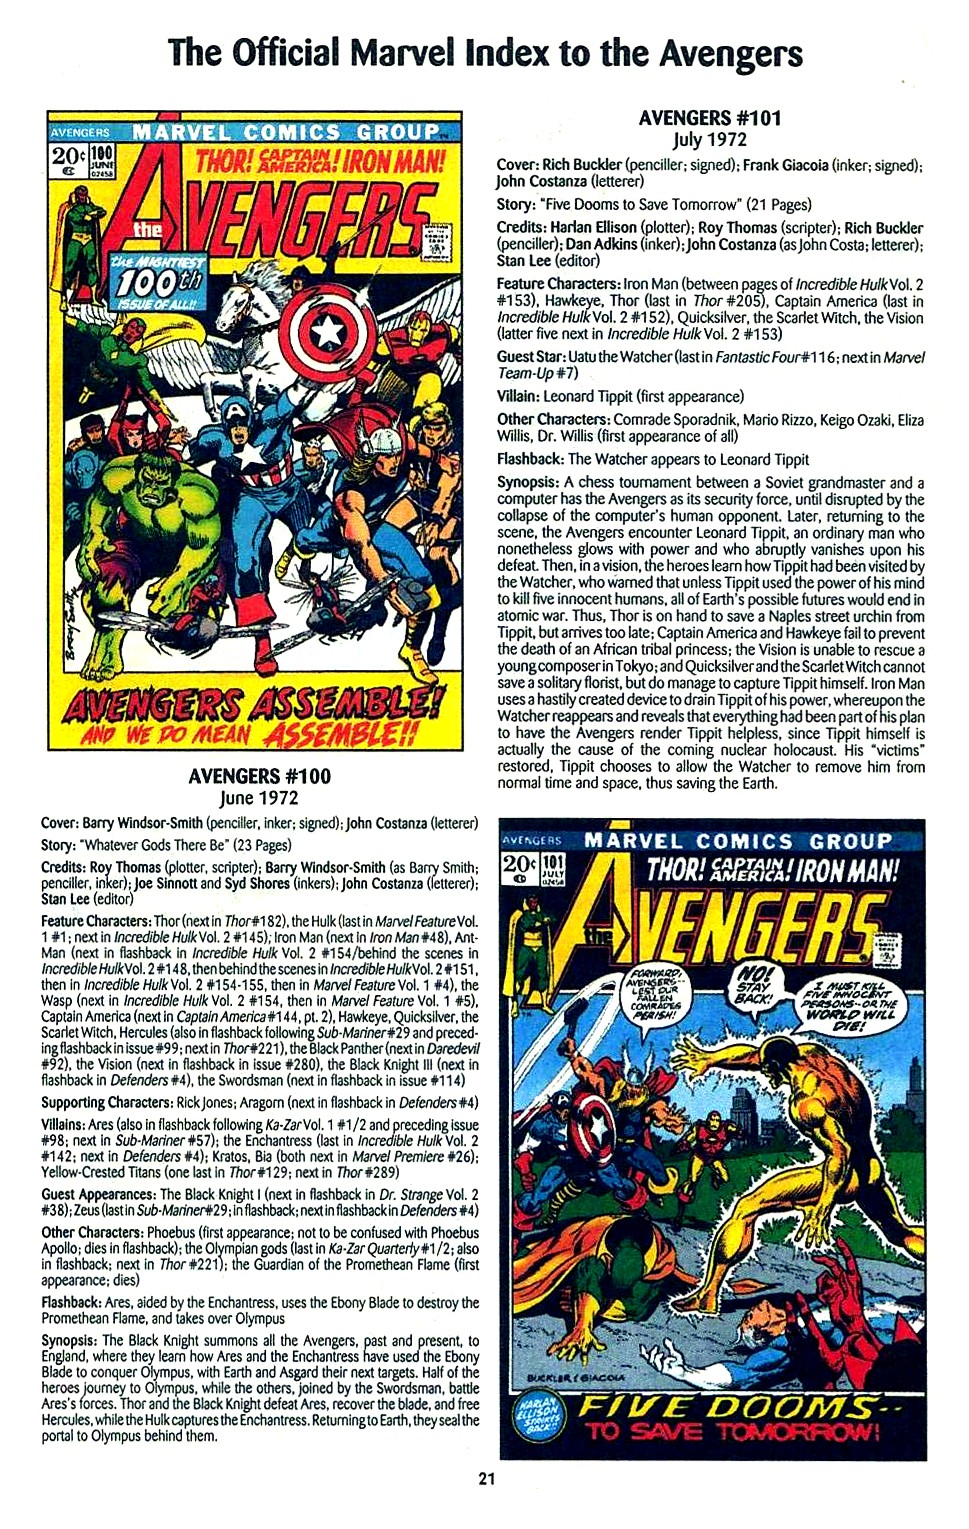 Read online The Official Marvel Index to the Avengers comic -  Issue #2 - 23